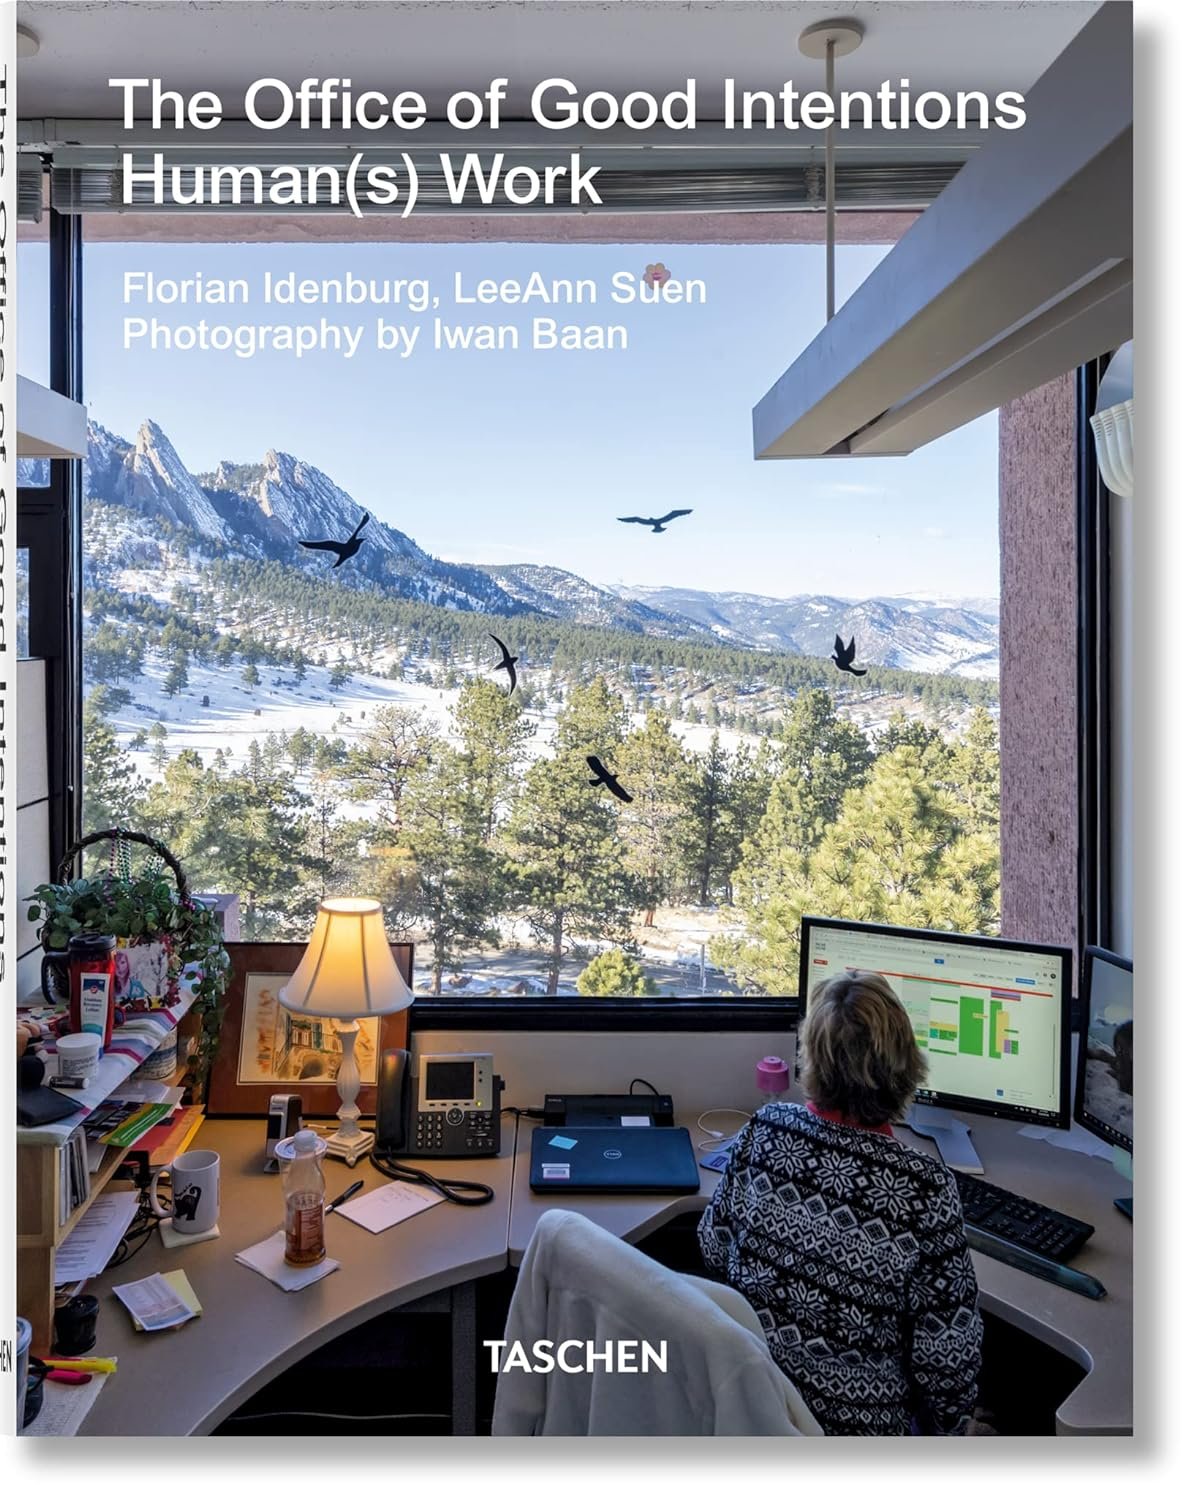 The Office of Good Intentions: Human(s) Work